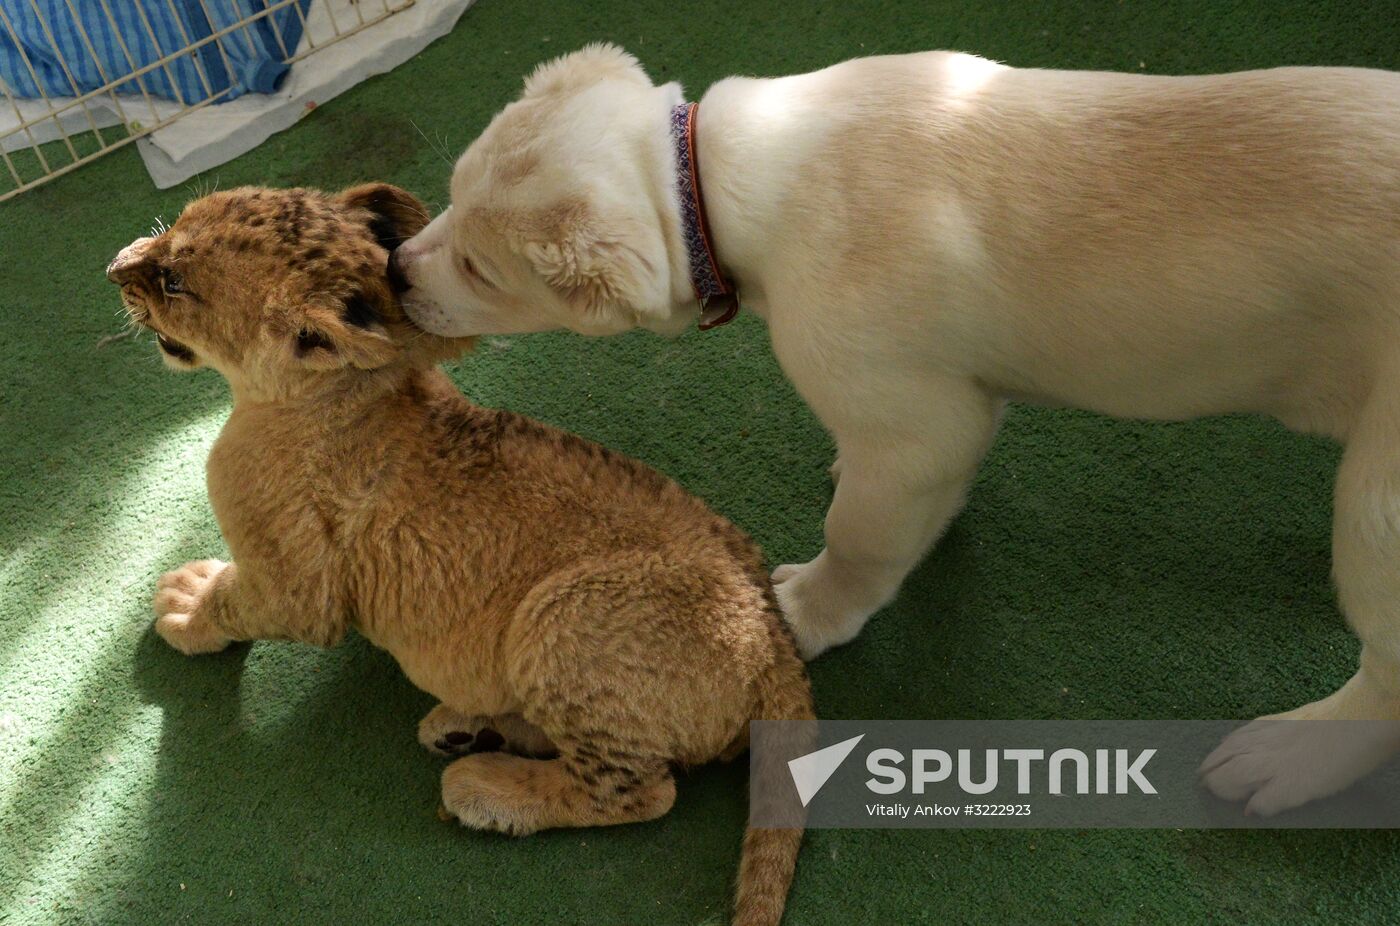 Young lioness in Vladivstok befriends a dog puppy